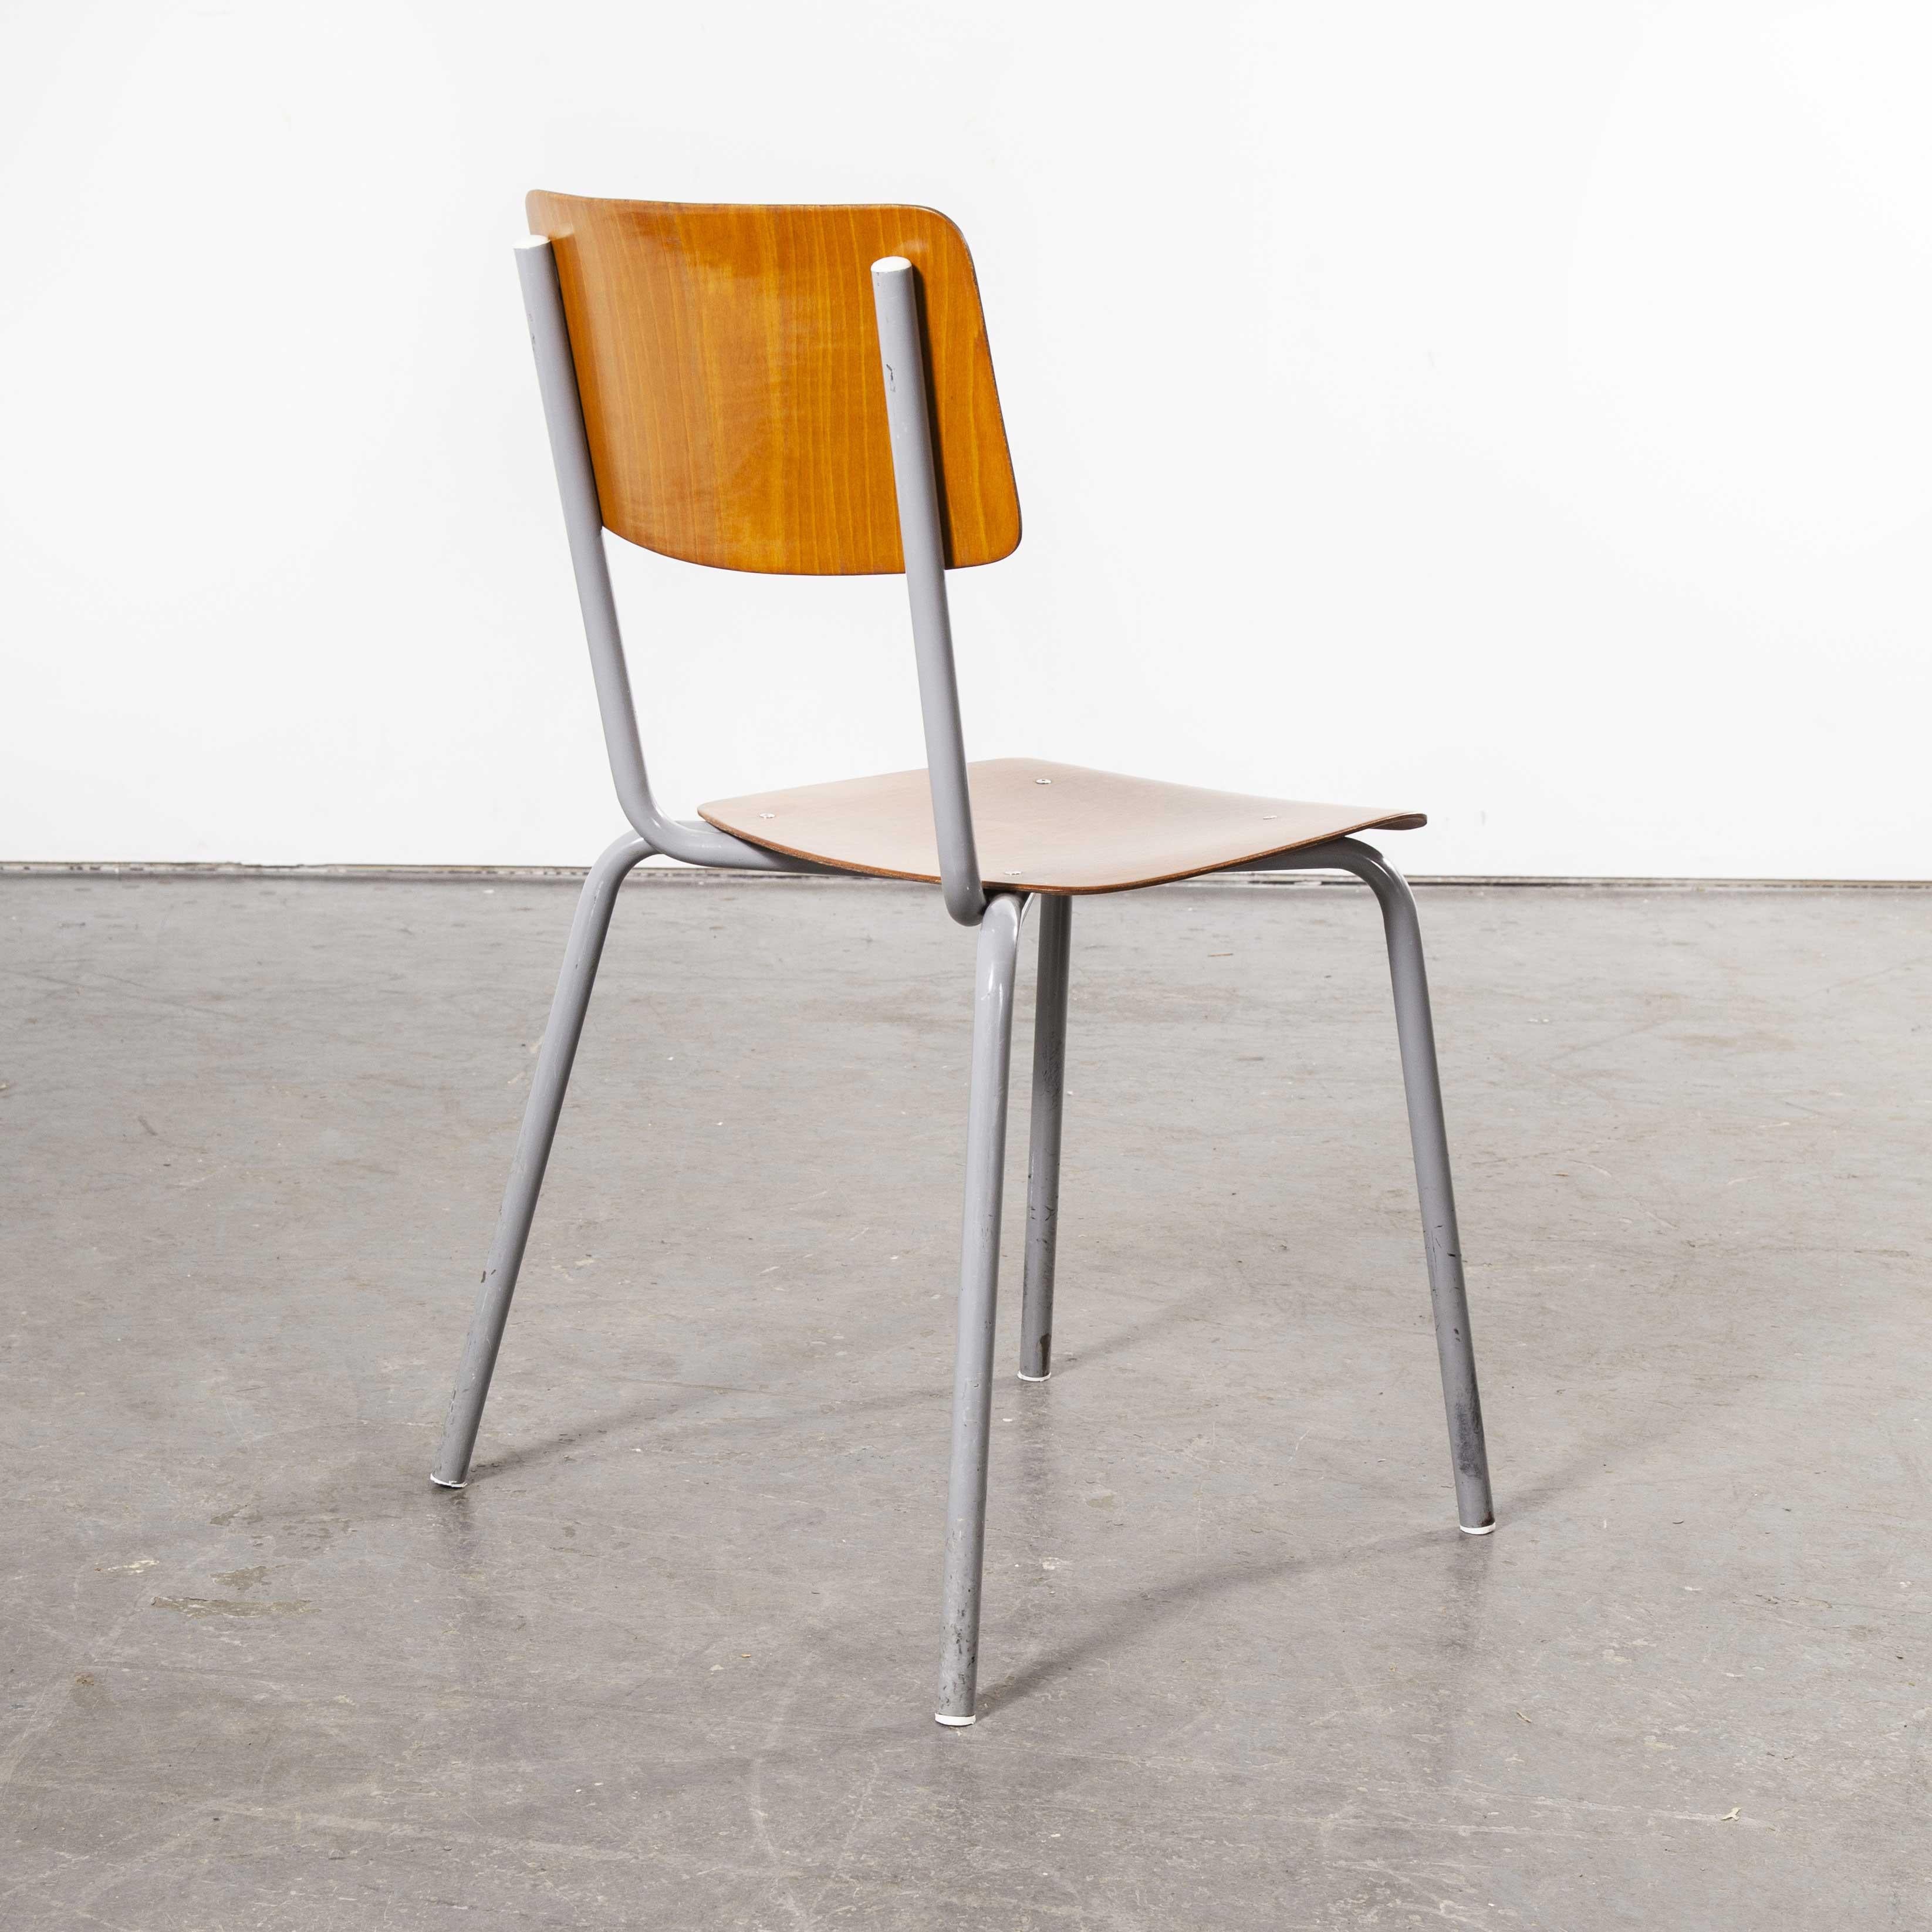 1960's Berl & Cie Mid Century Stacking Chairs - Pagholz - Letzte Restbestände im Angebot 1